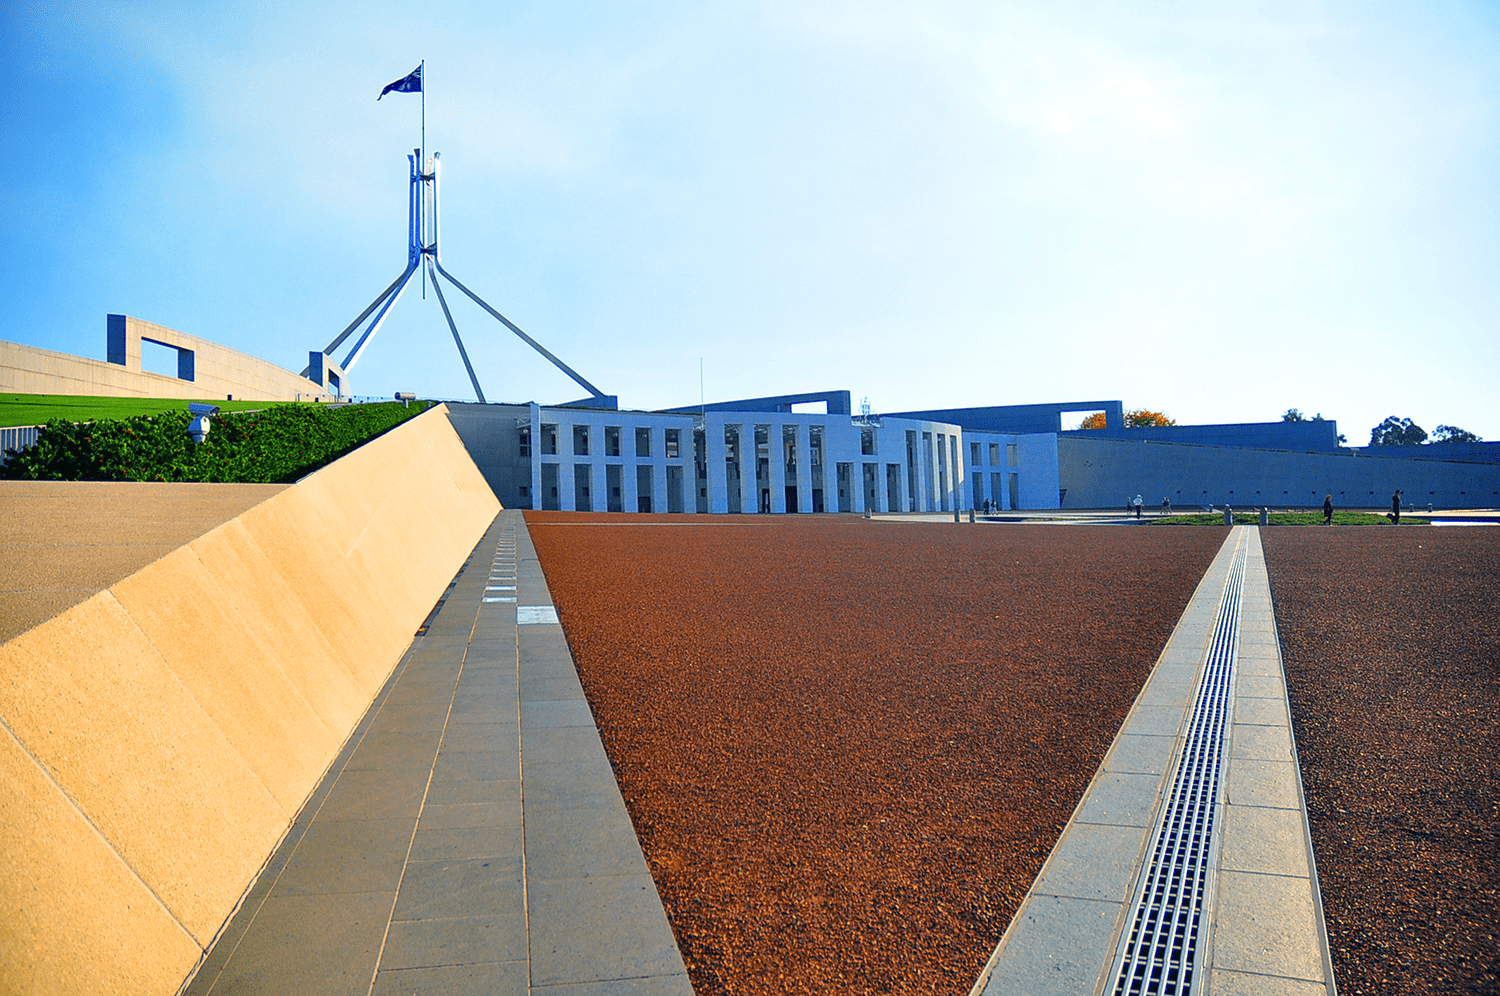 Parliament House, Canberra ACT